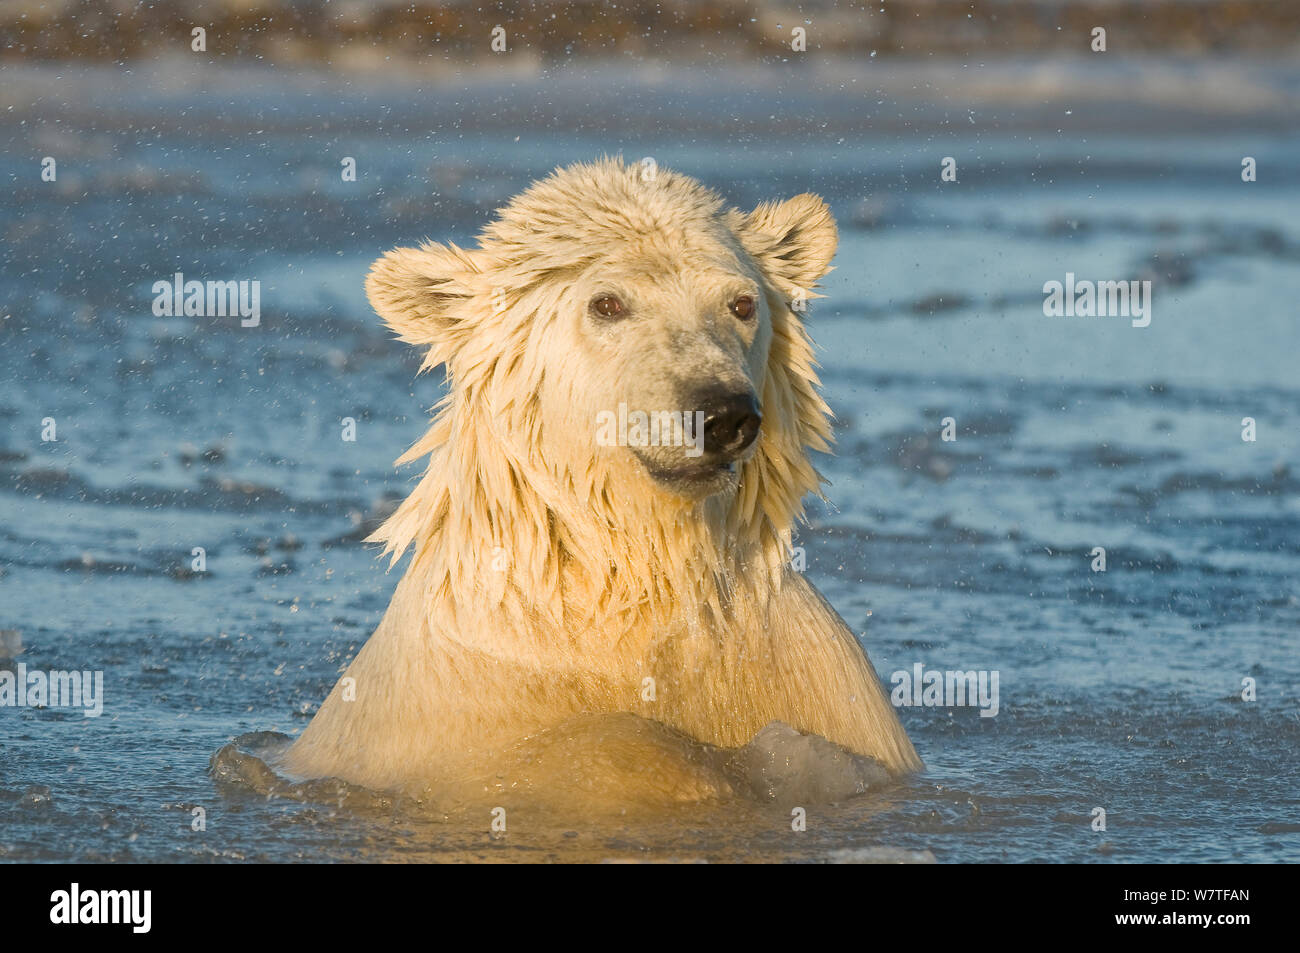 Young polar bear (Ursus maritimus) in slushy icy water, off the 1002 area of the Arctic National Wildlife Refuge, North Slope of the Brooks Range, Beaufort Sea, Alaska, October. Stock Photo